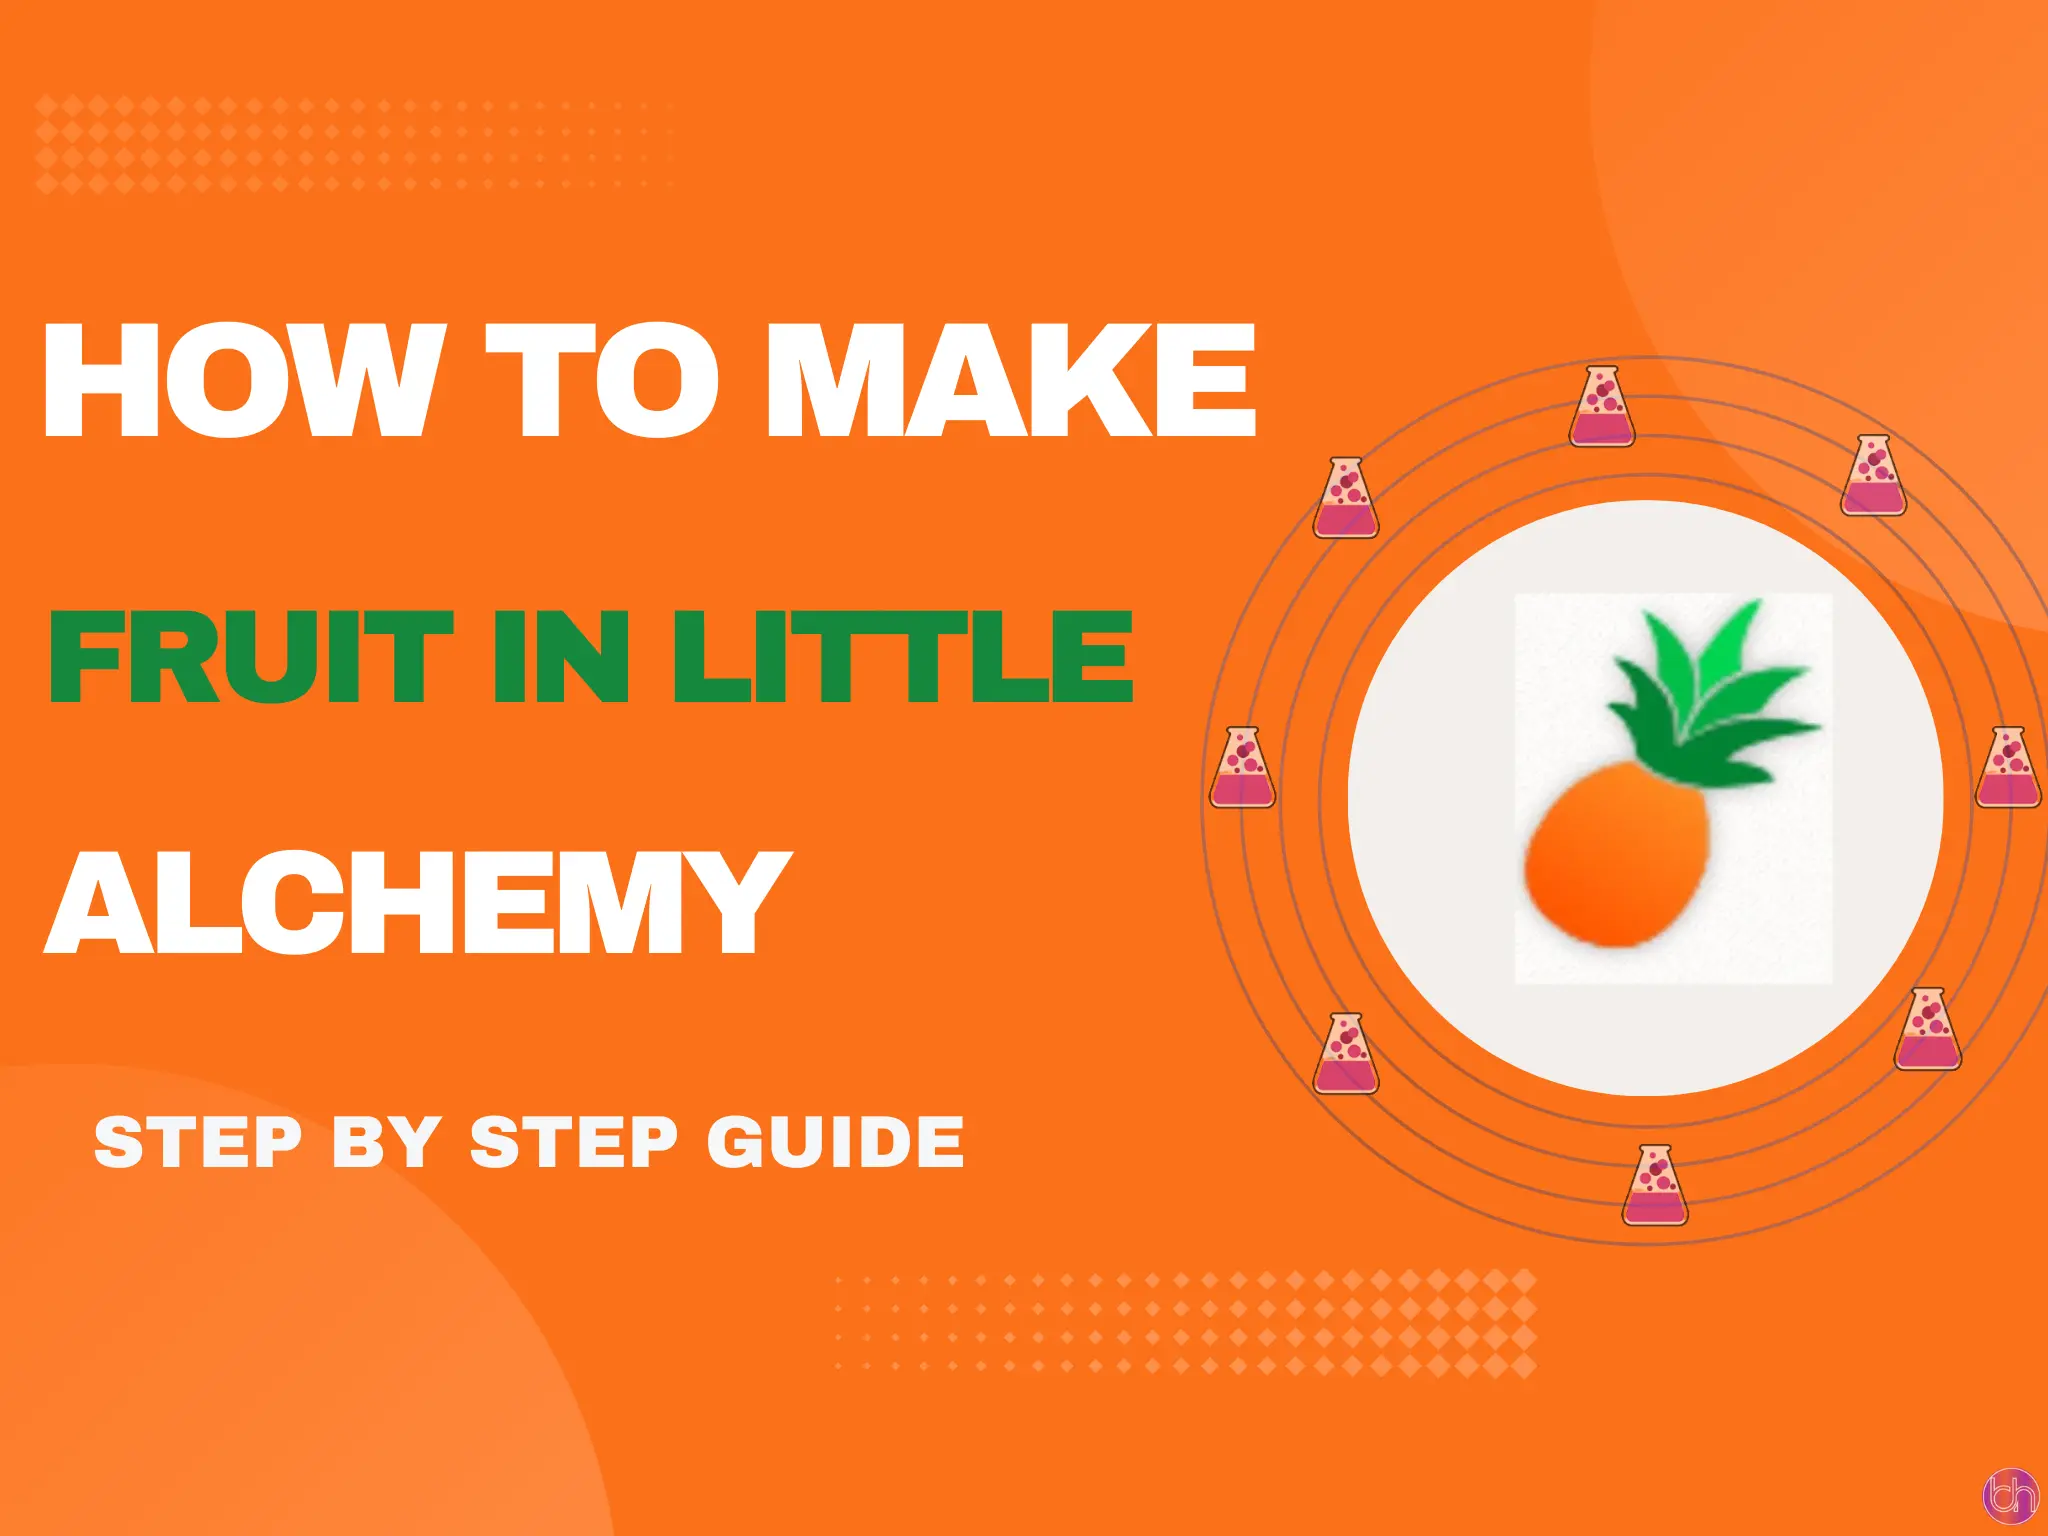 How to make Fruit in little alchemy